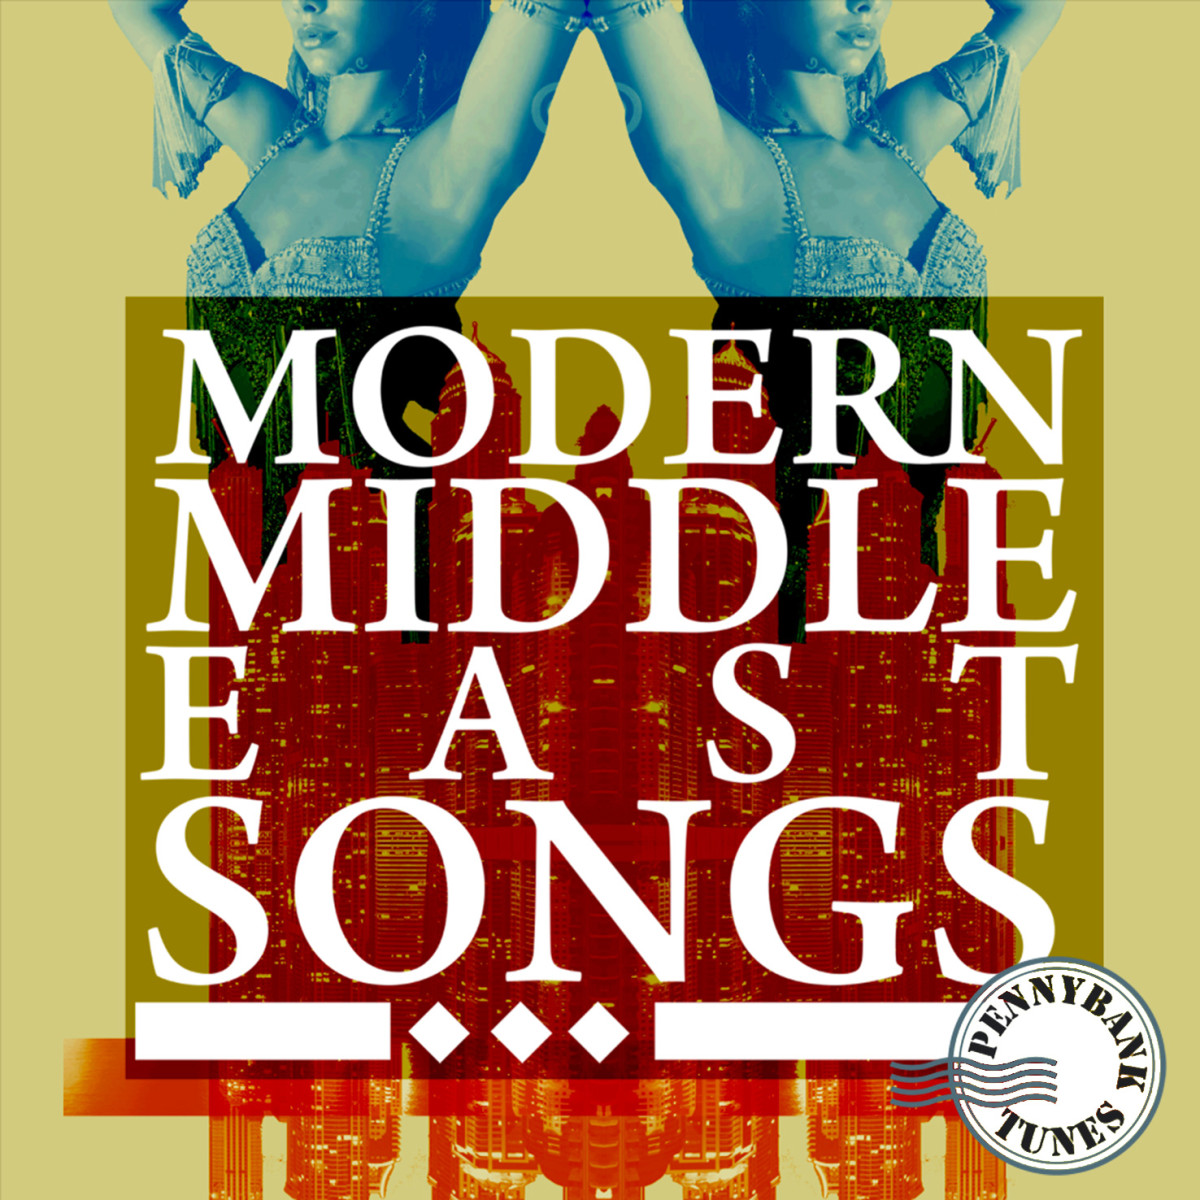 PNBT-1058-MODERN-MIDDLE-EAST-SONGS - COVER